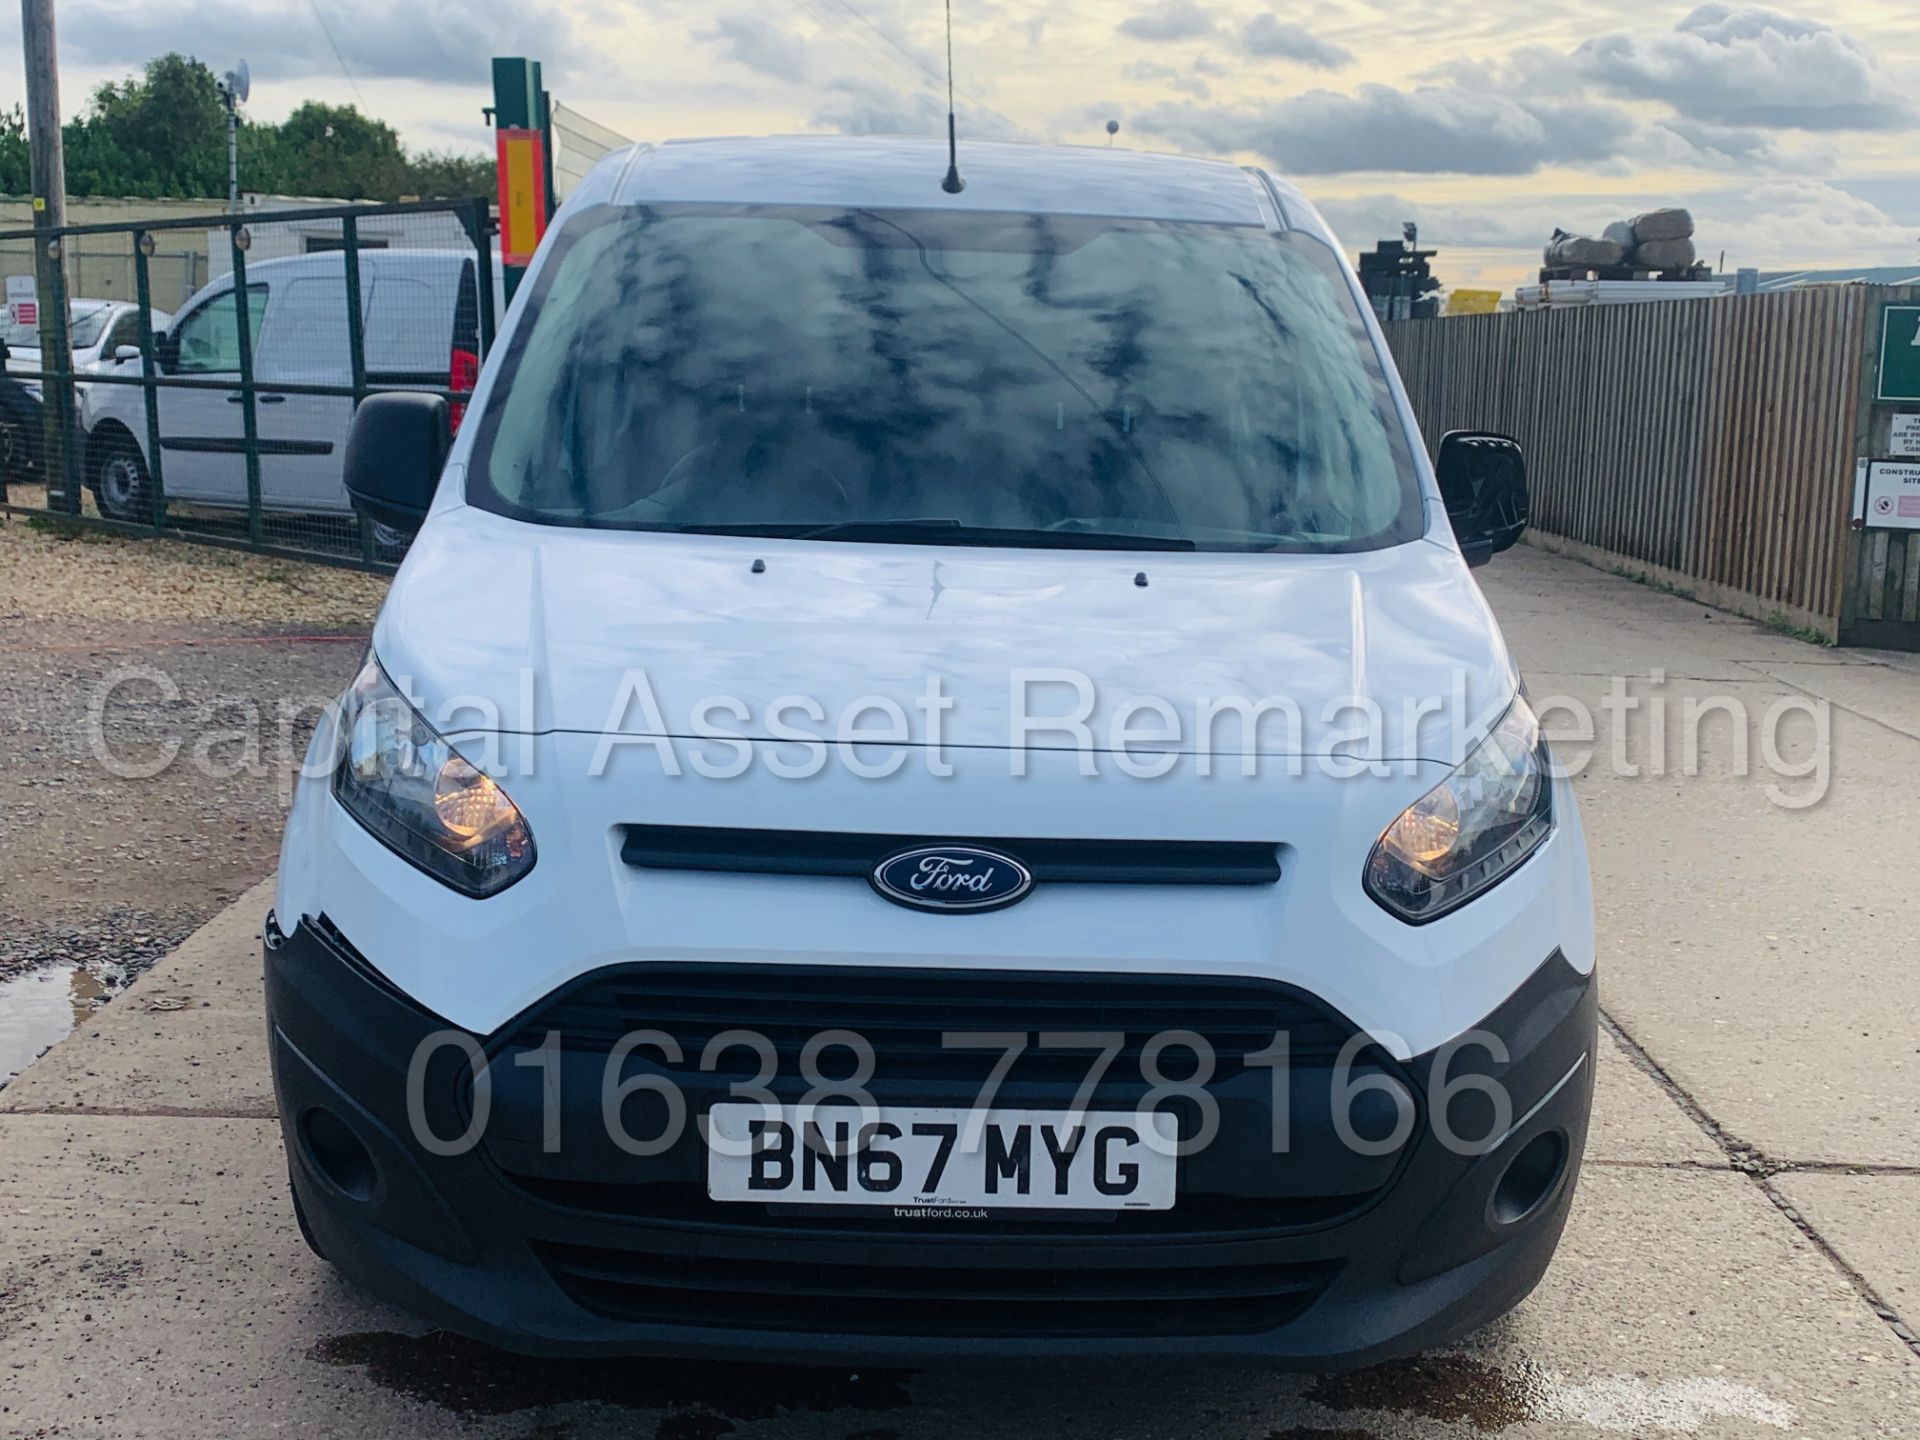 (ON SALE) FORD TRANSIT CONNECT *LWB - 5 SEATER CREW VAN* (2018 - EURO 6) 1.5 TDCI *A/C* (1 OWNER) - Image 14 of 40